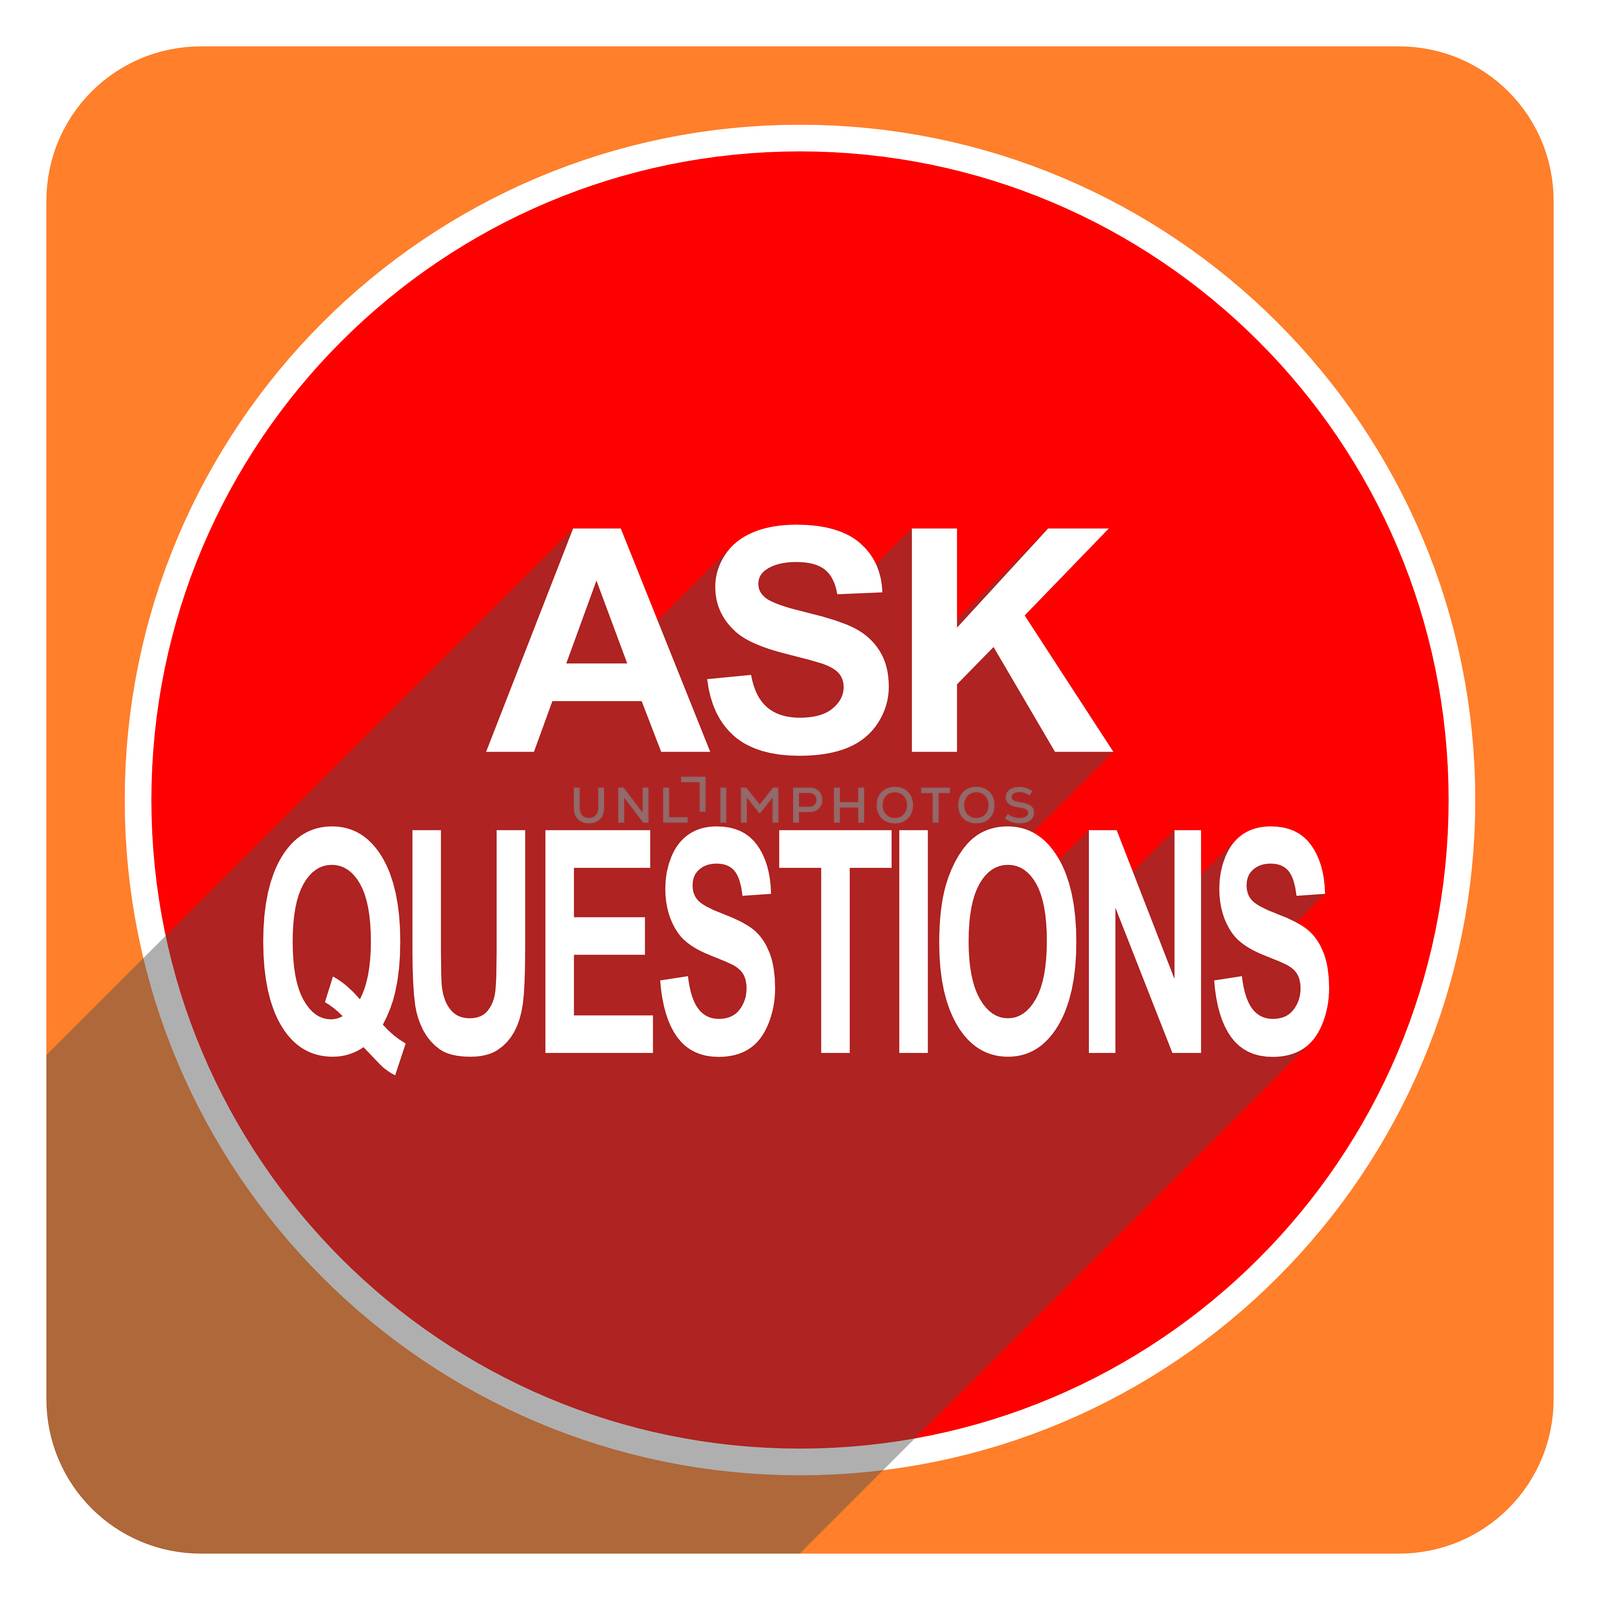 ask questions red flat icon isolated